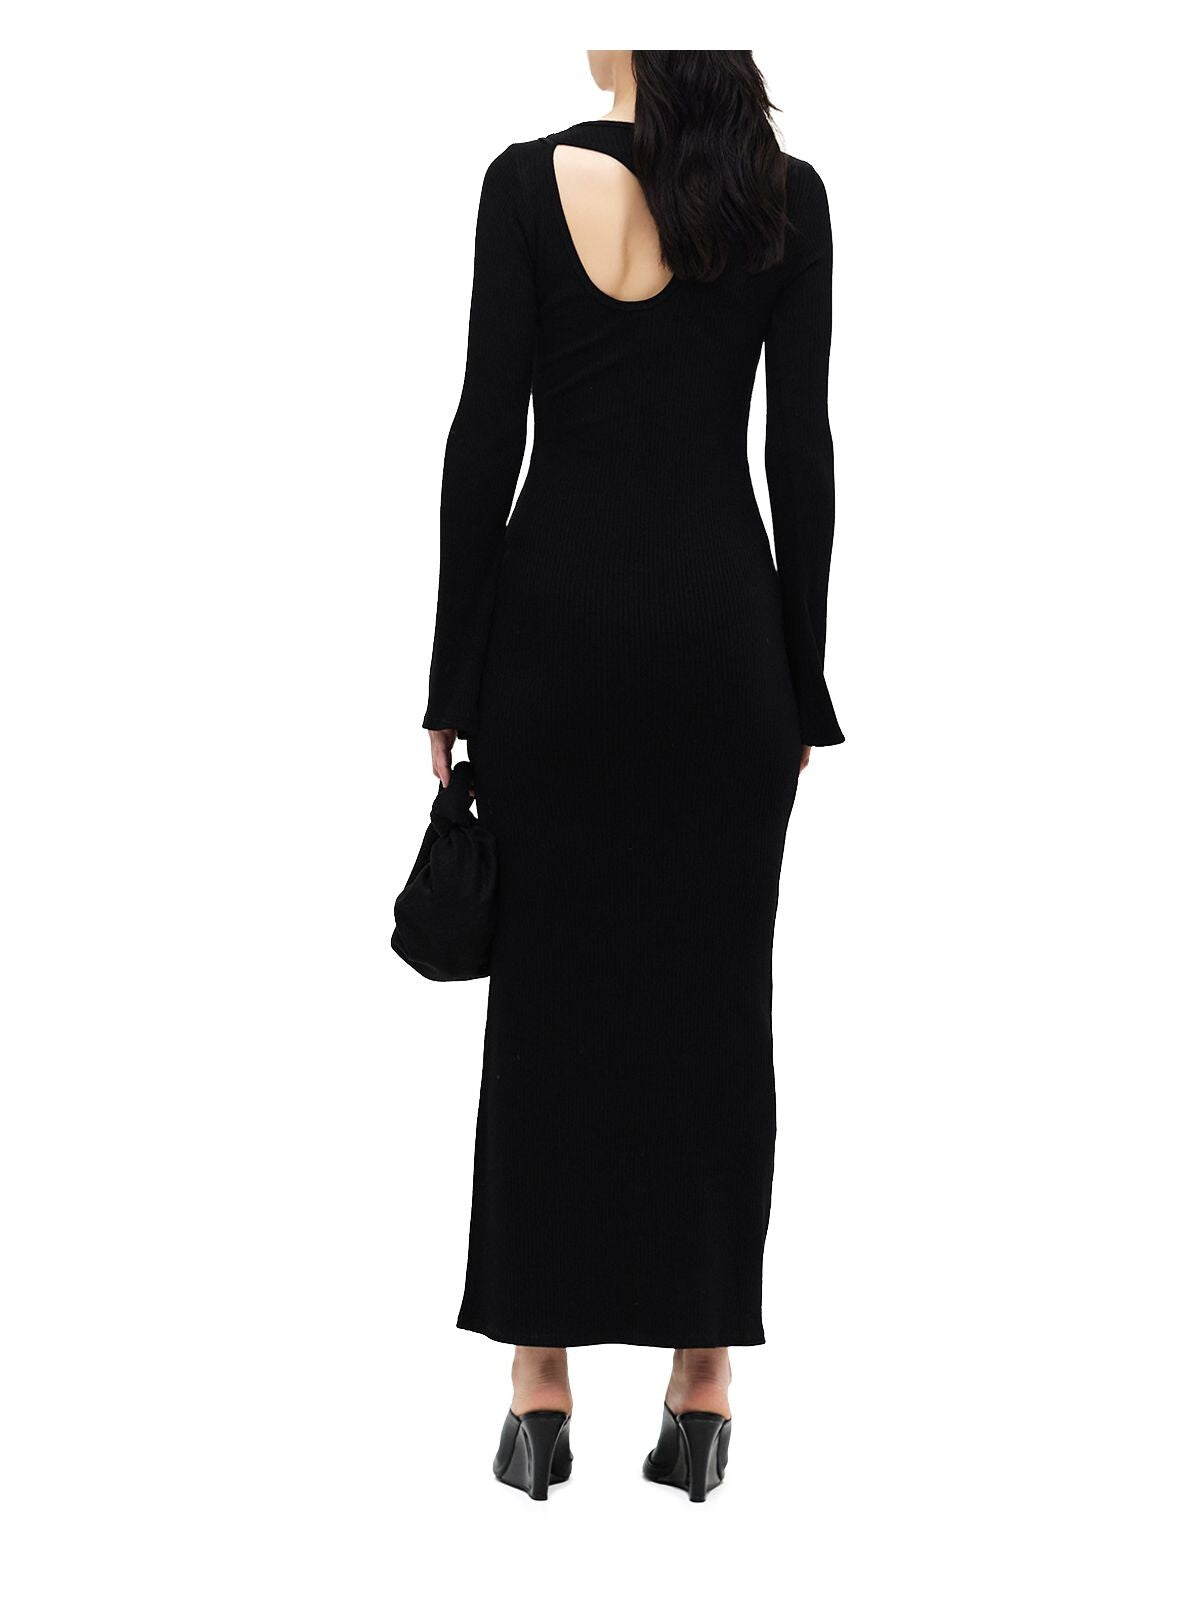 SIMON MILLER Womens Black Ribbed Cut Out Long Sleeve Round Neck Maxi Sheath Dress S